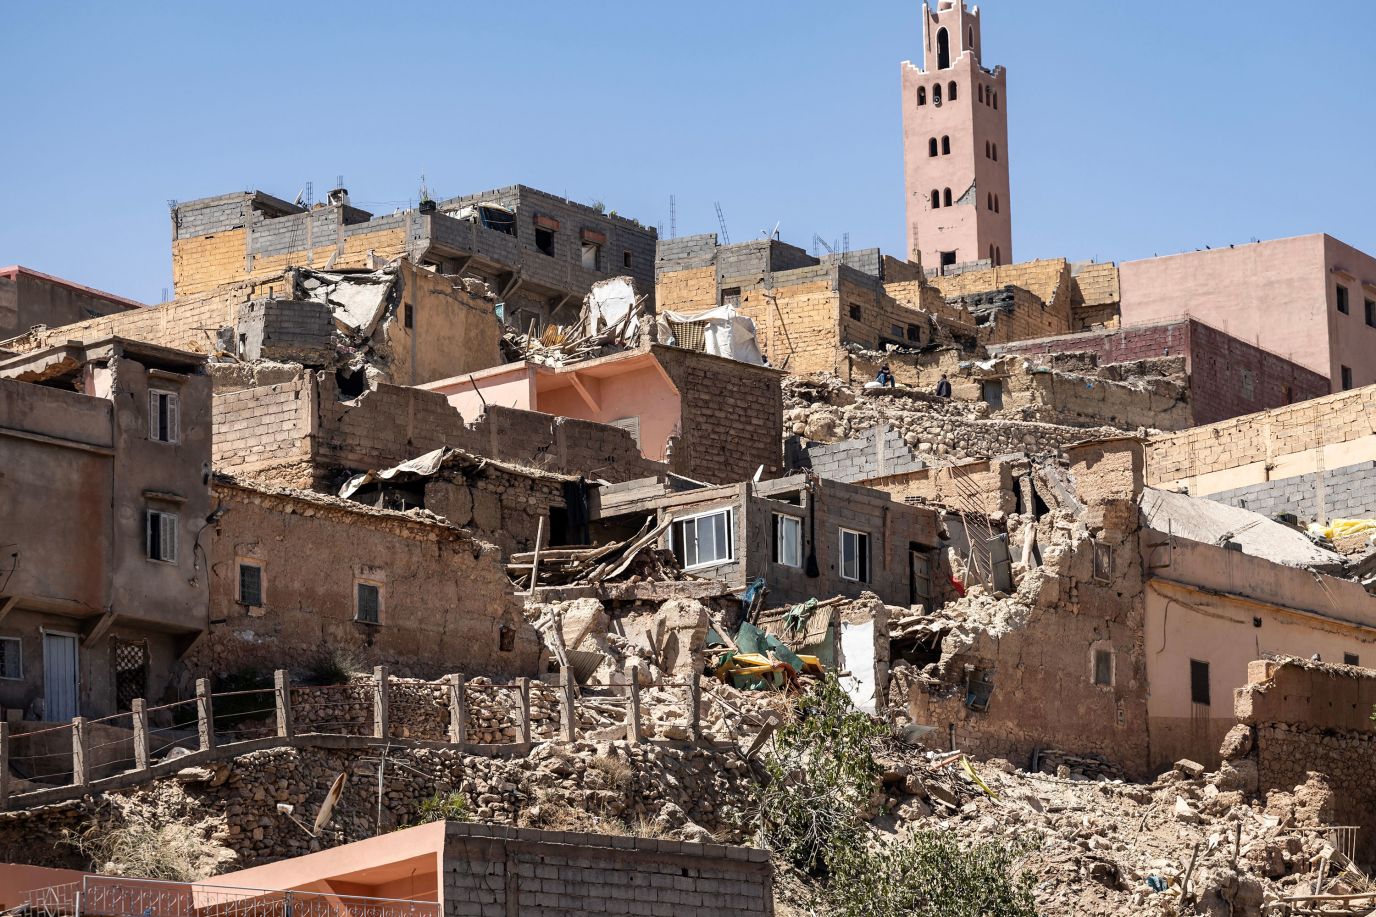 The minaret of a mosque stands behind damaged or destroyed houses following an earthquake in Moulay Brahim, Morocco, on September 9.